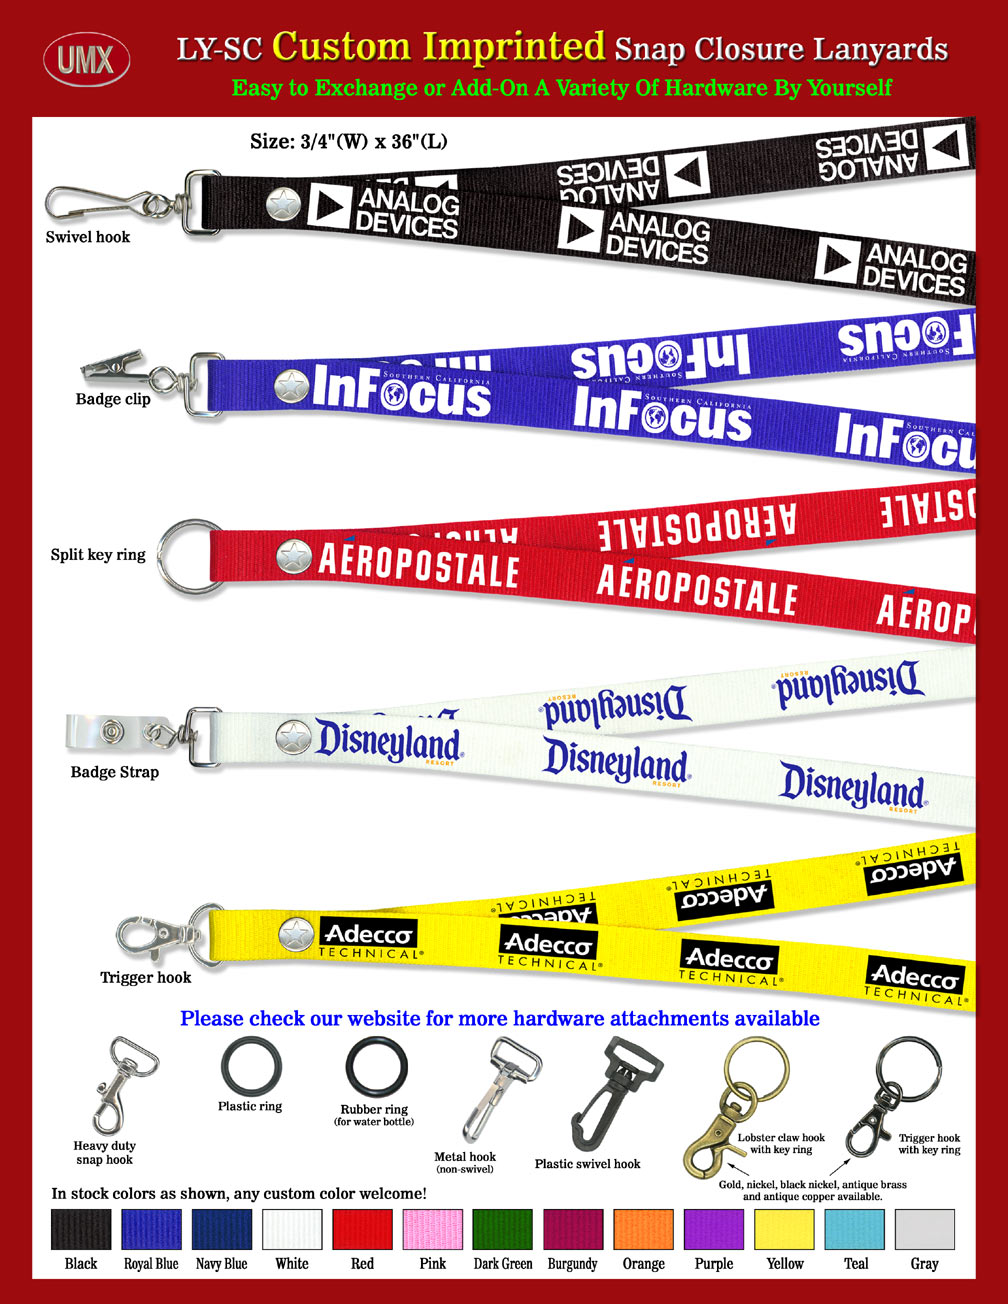 Full Color Custom Printed Snap-On Lanyards With Sharp Imprinted Images - 3/4" High Quality Custom Imprinted Lanyards With 13-Color Of Straps Available.